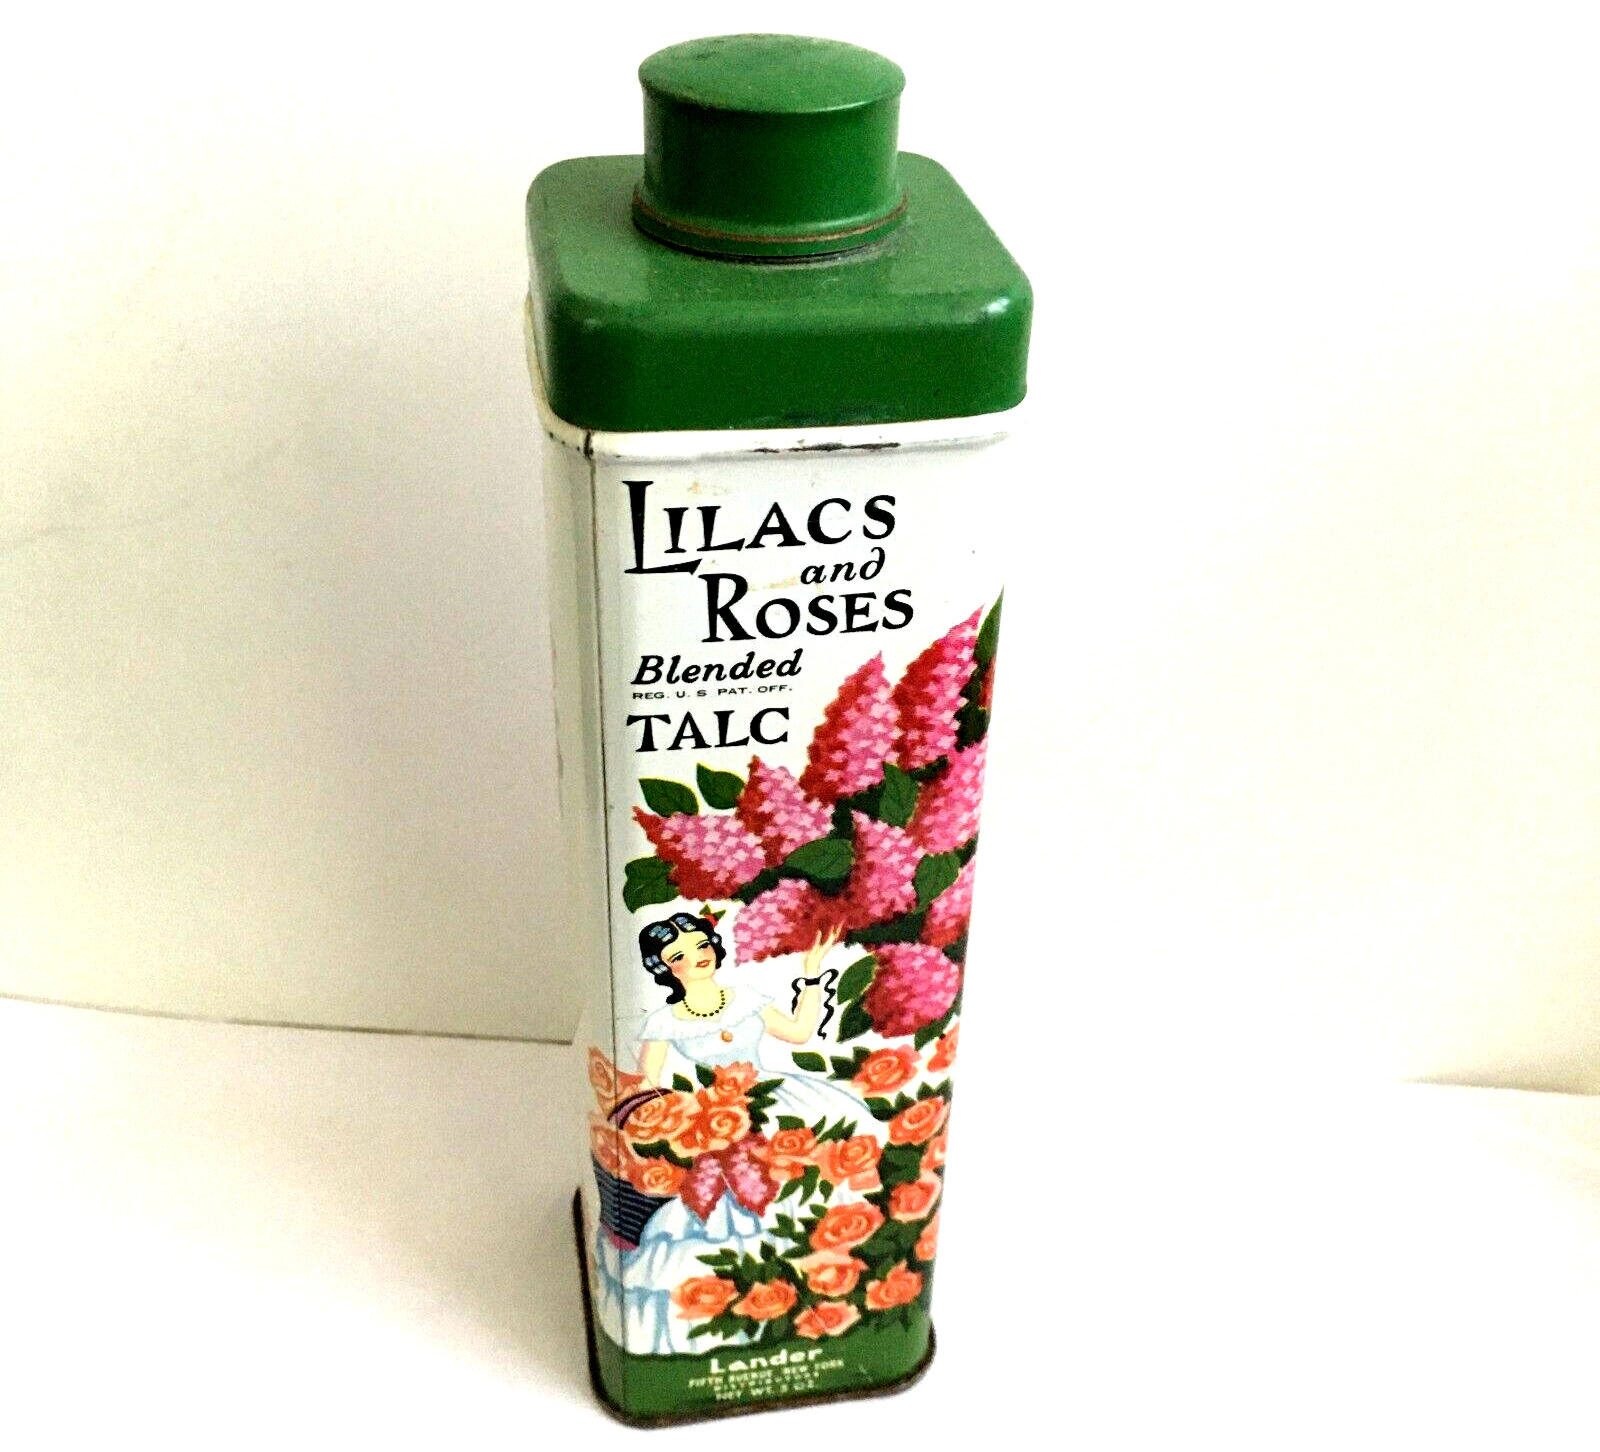 Vintage Lander's Lilac and Roses Blended Talc Powder Tin Container 5 OZ FULL